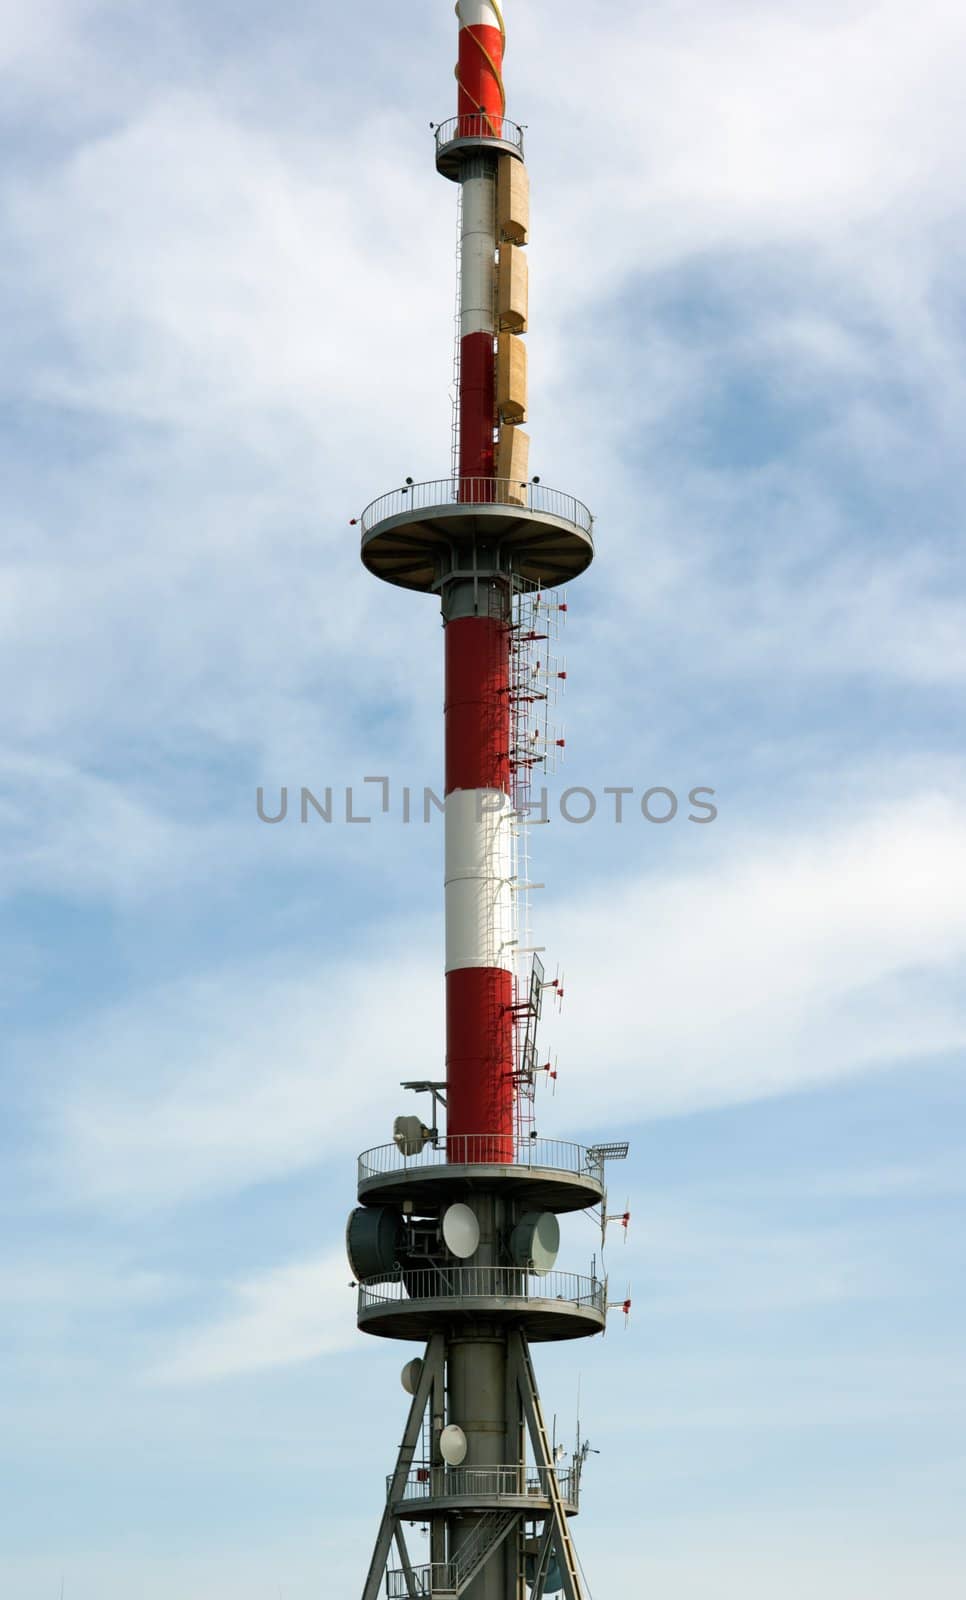 The top of a communication tower